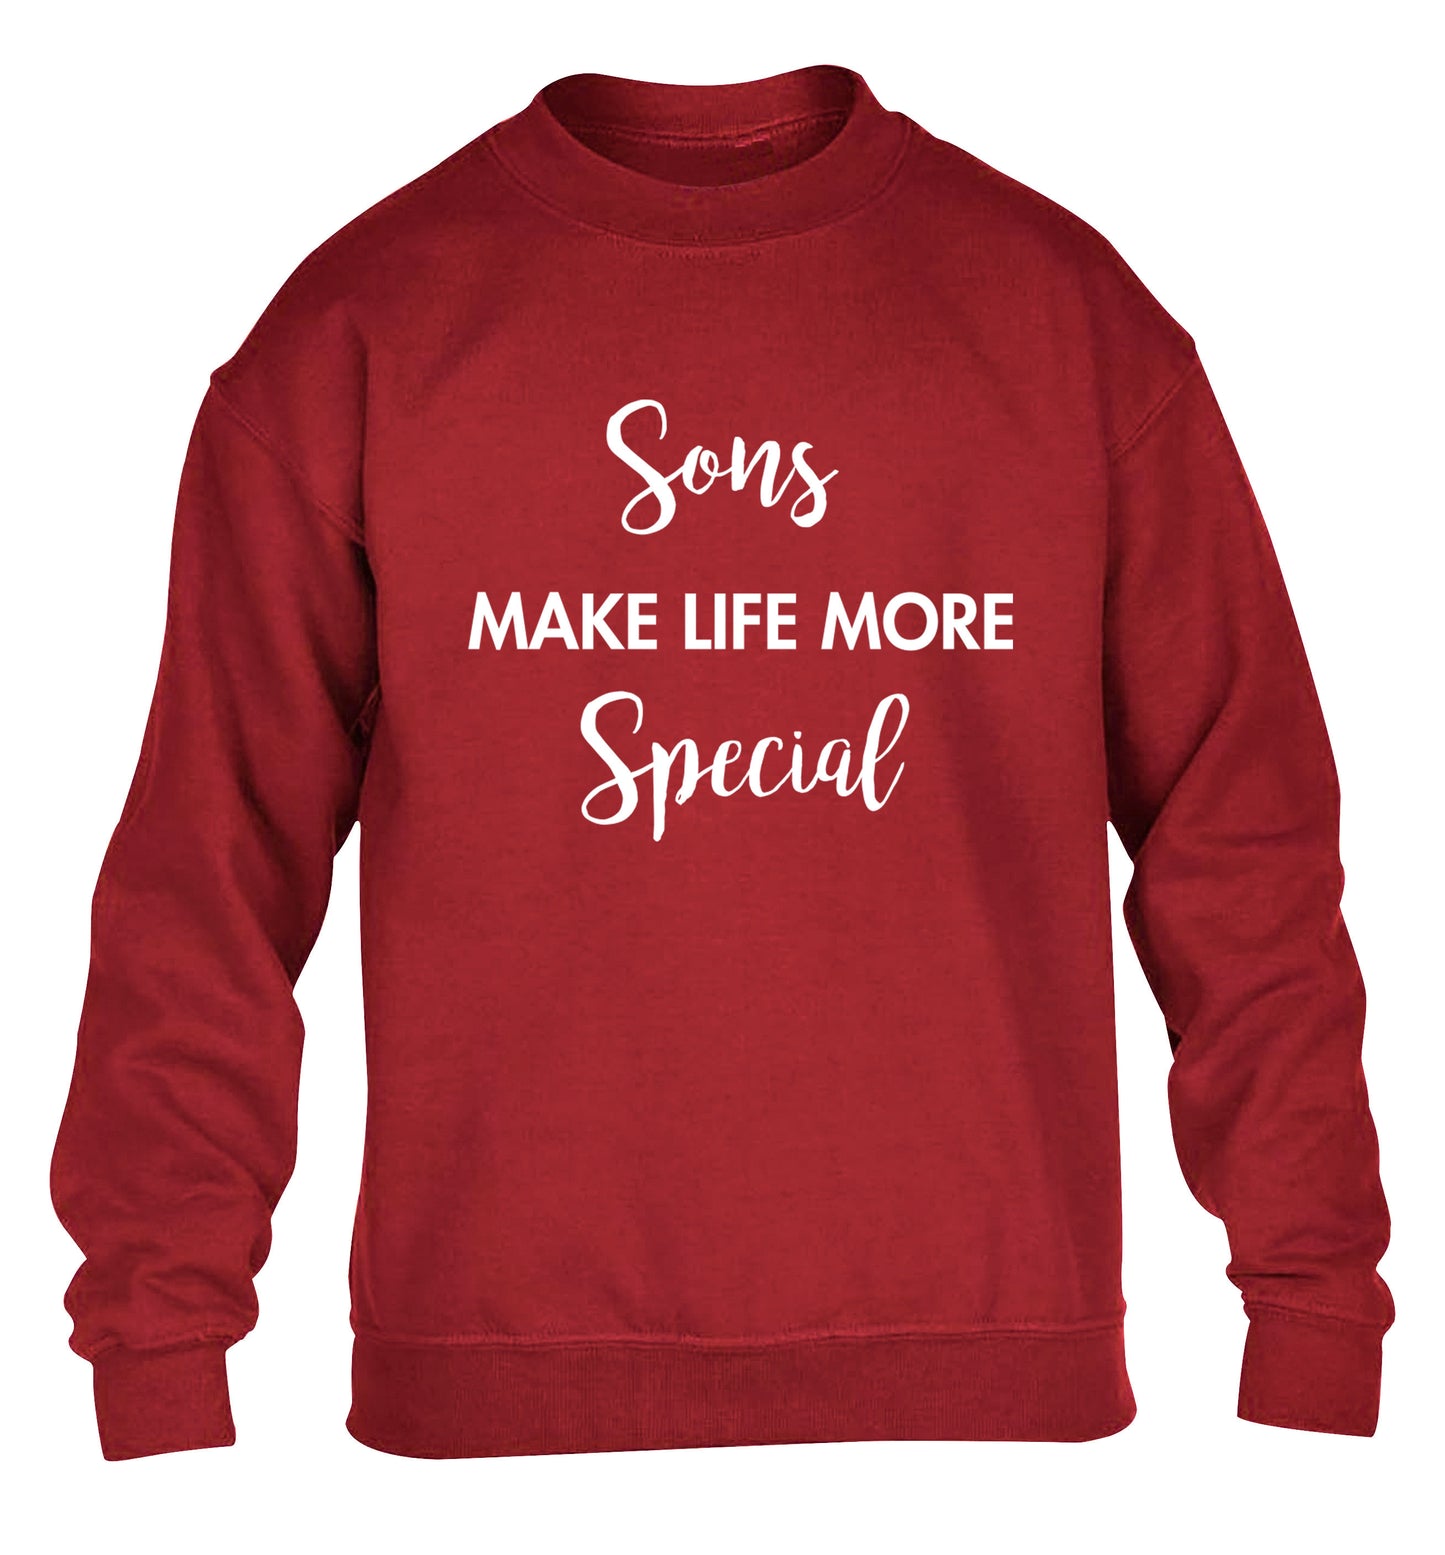 Daughters make life more special children's grey sweater 12-14 Years